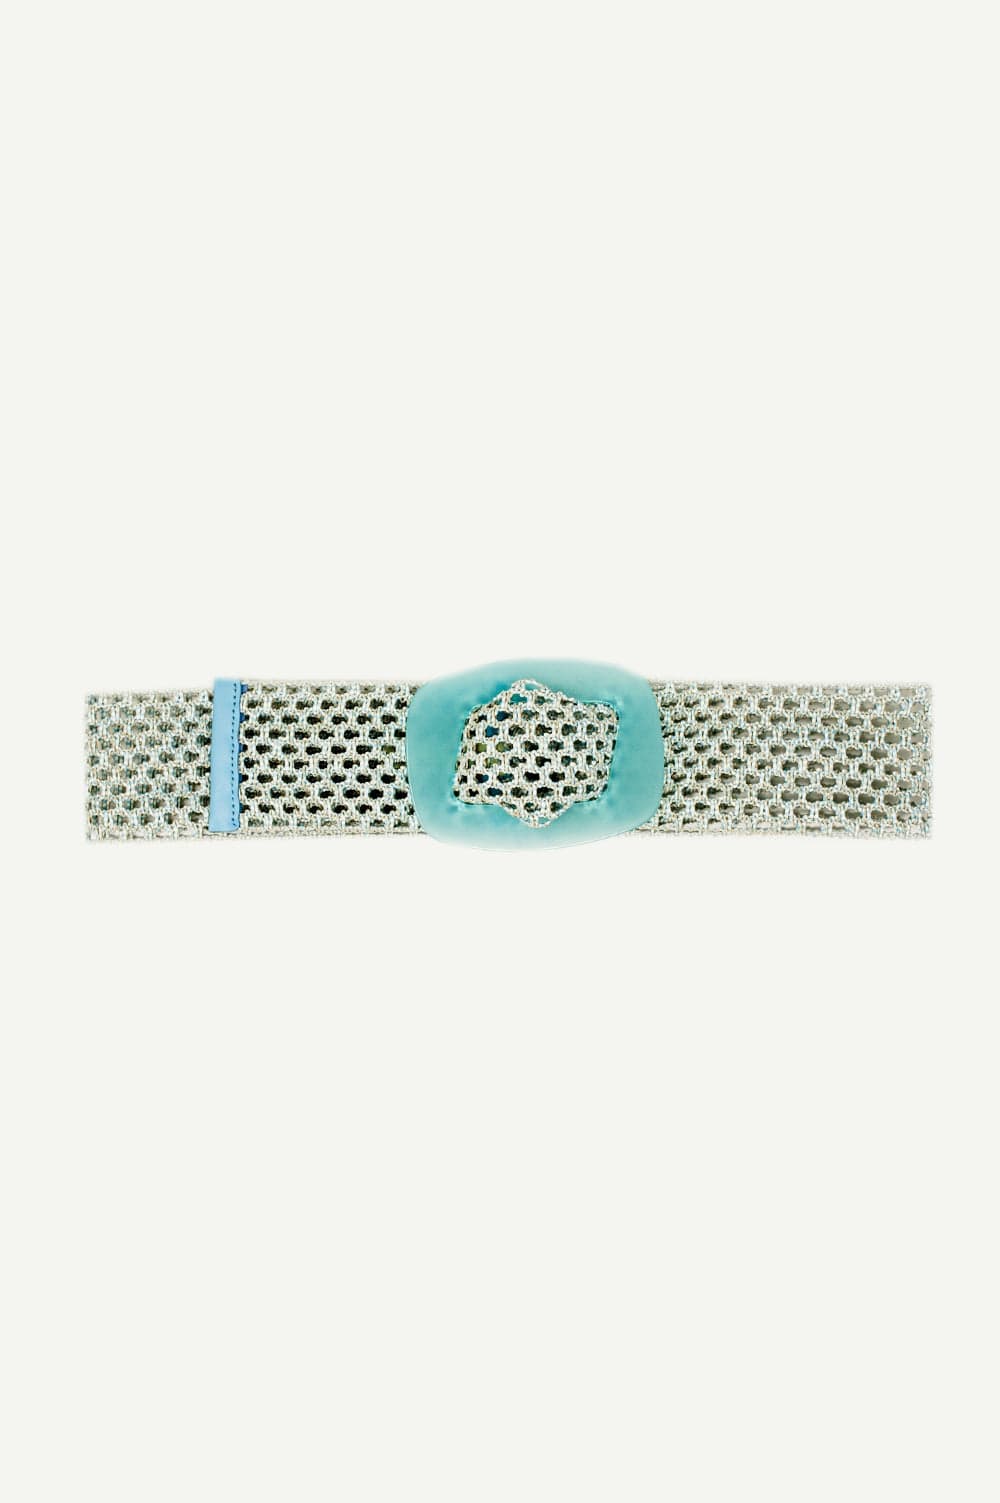 Q2 Women's Belt One Size / Blue / China Woven belt with resin buckle in lightblue